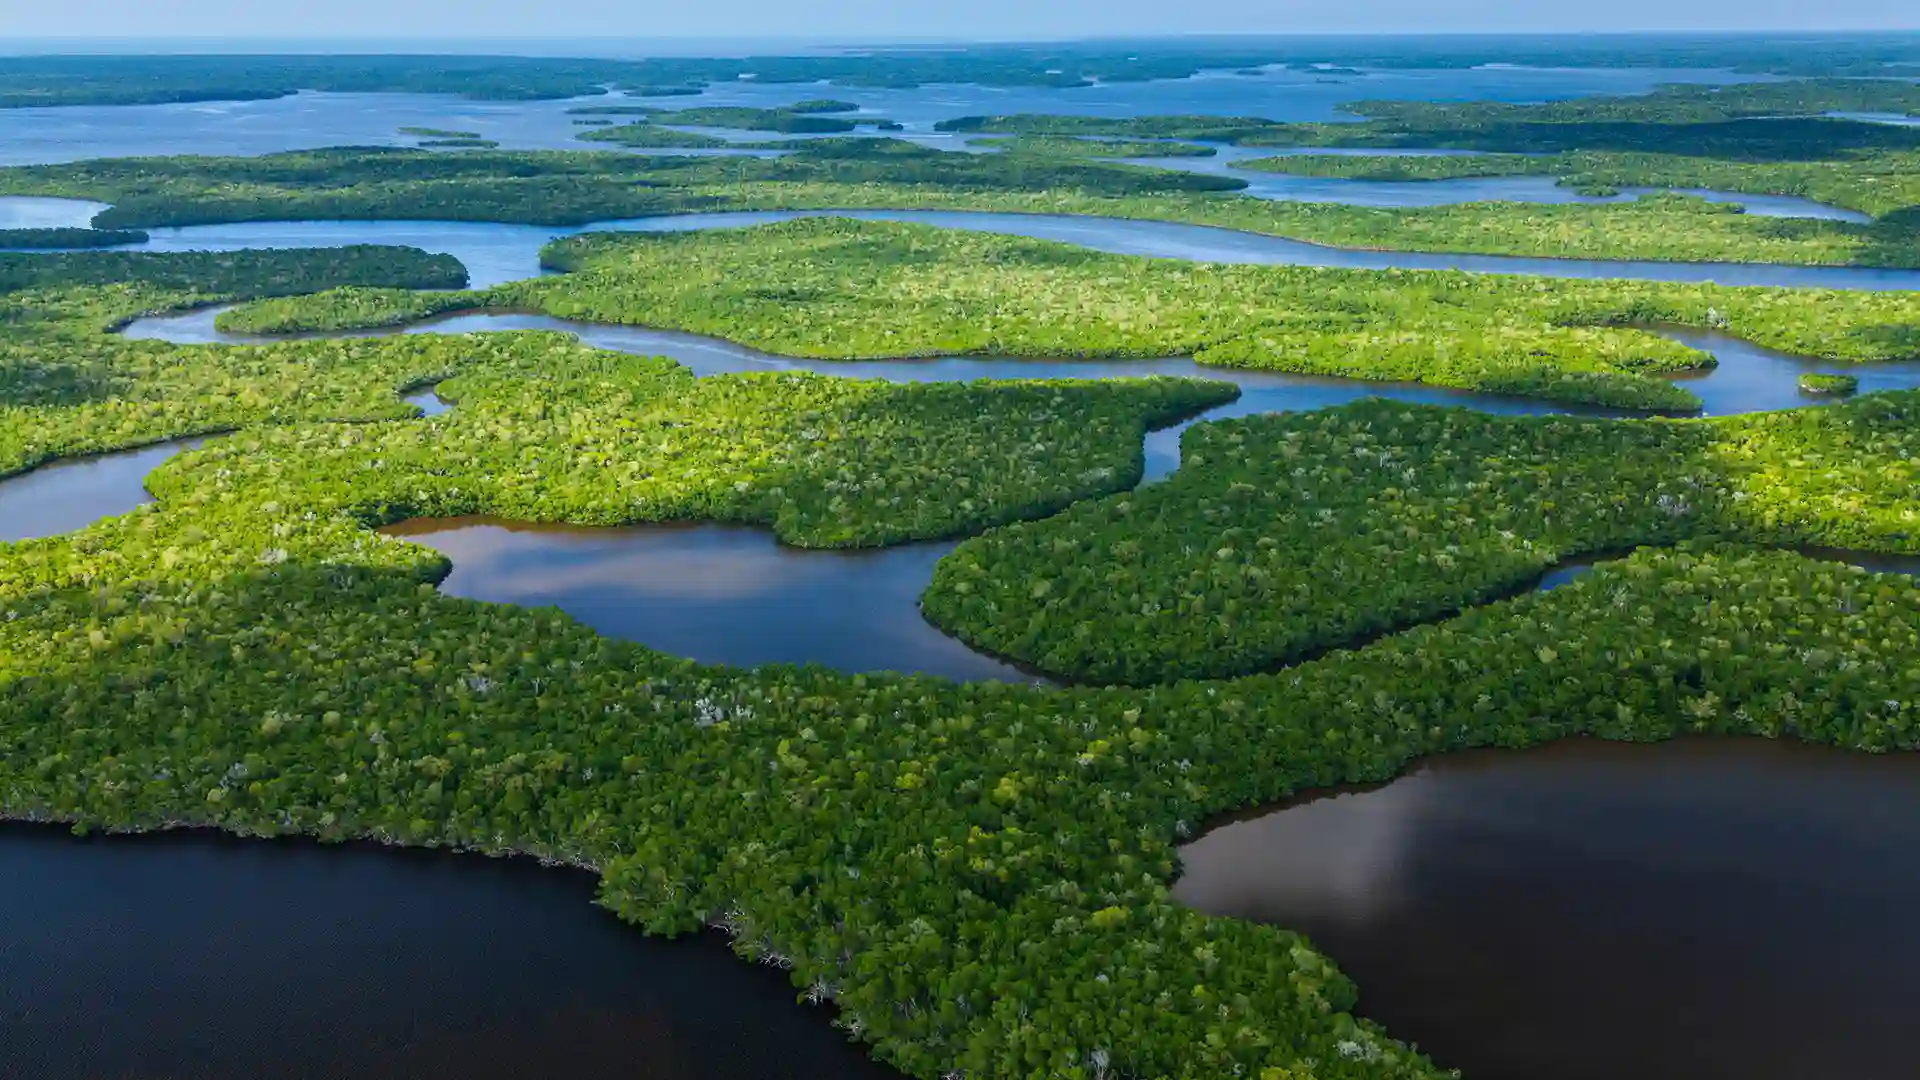 Aerial view of Everglades National Park in Florida.